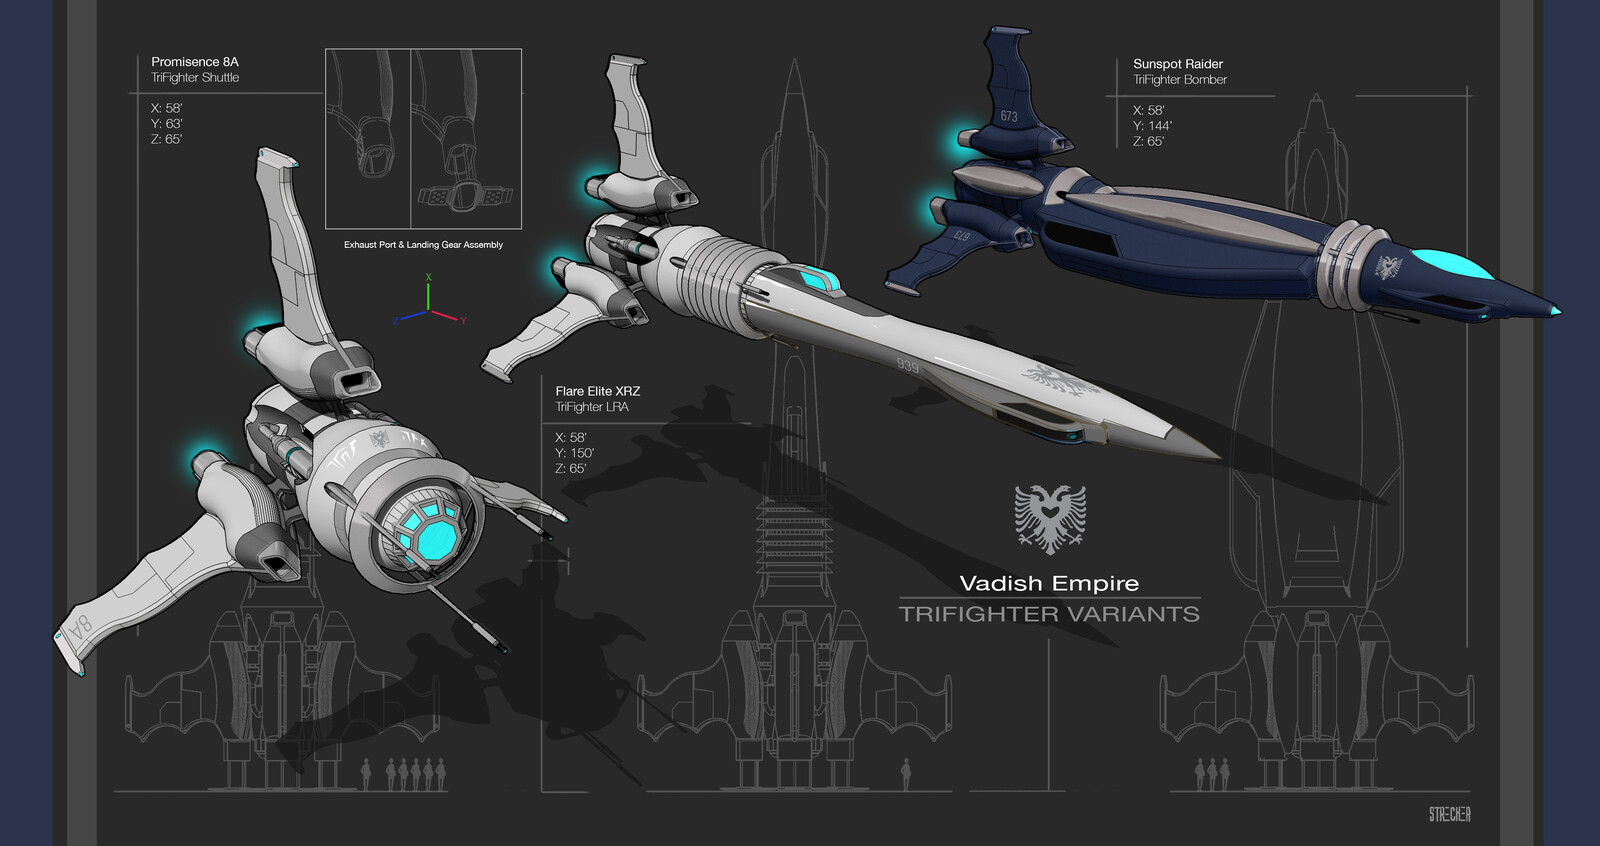 Modular multi-role space fighters from the Vadish Empire